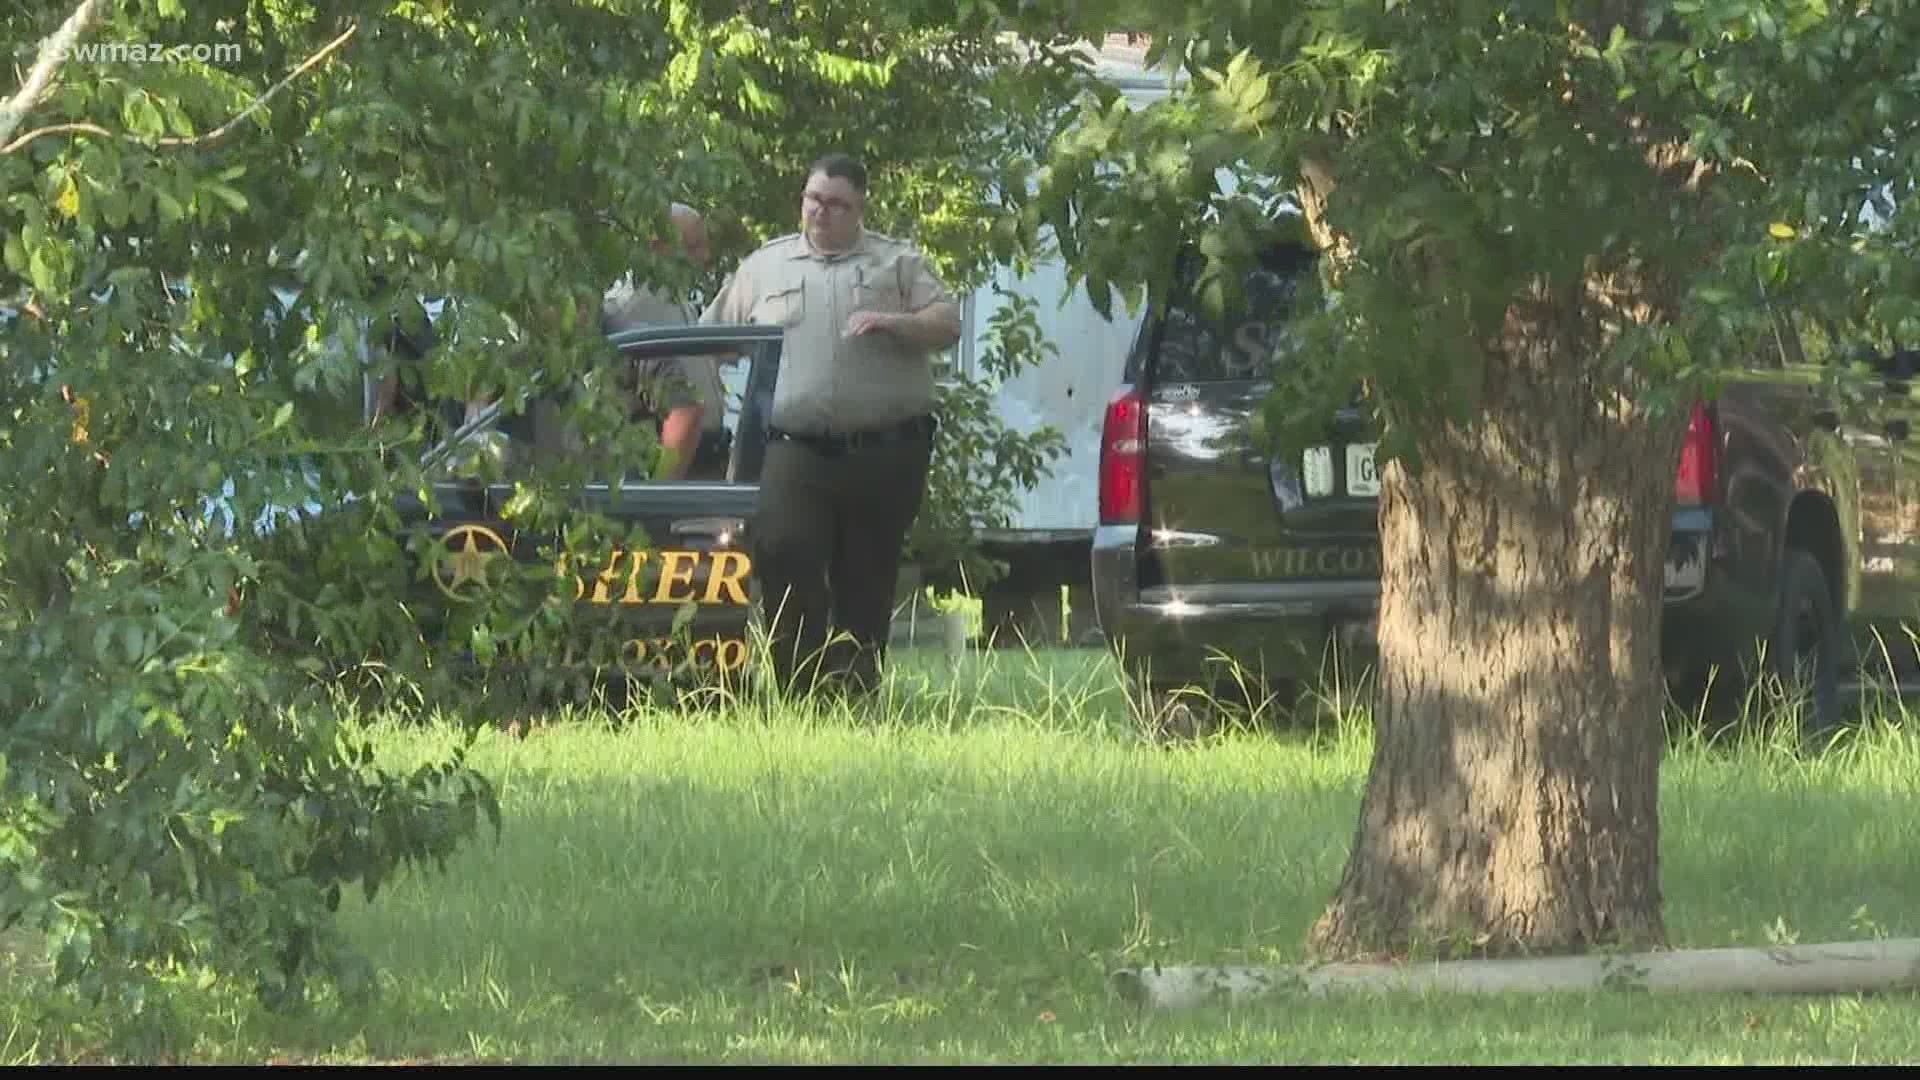 Deputies in Wilcox County are investigating after a 4-year-old girl was found dead in a mobile home Tuesday evening.